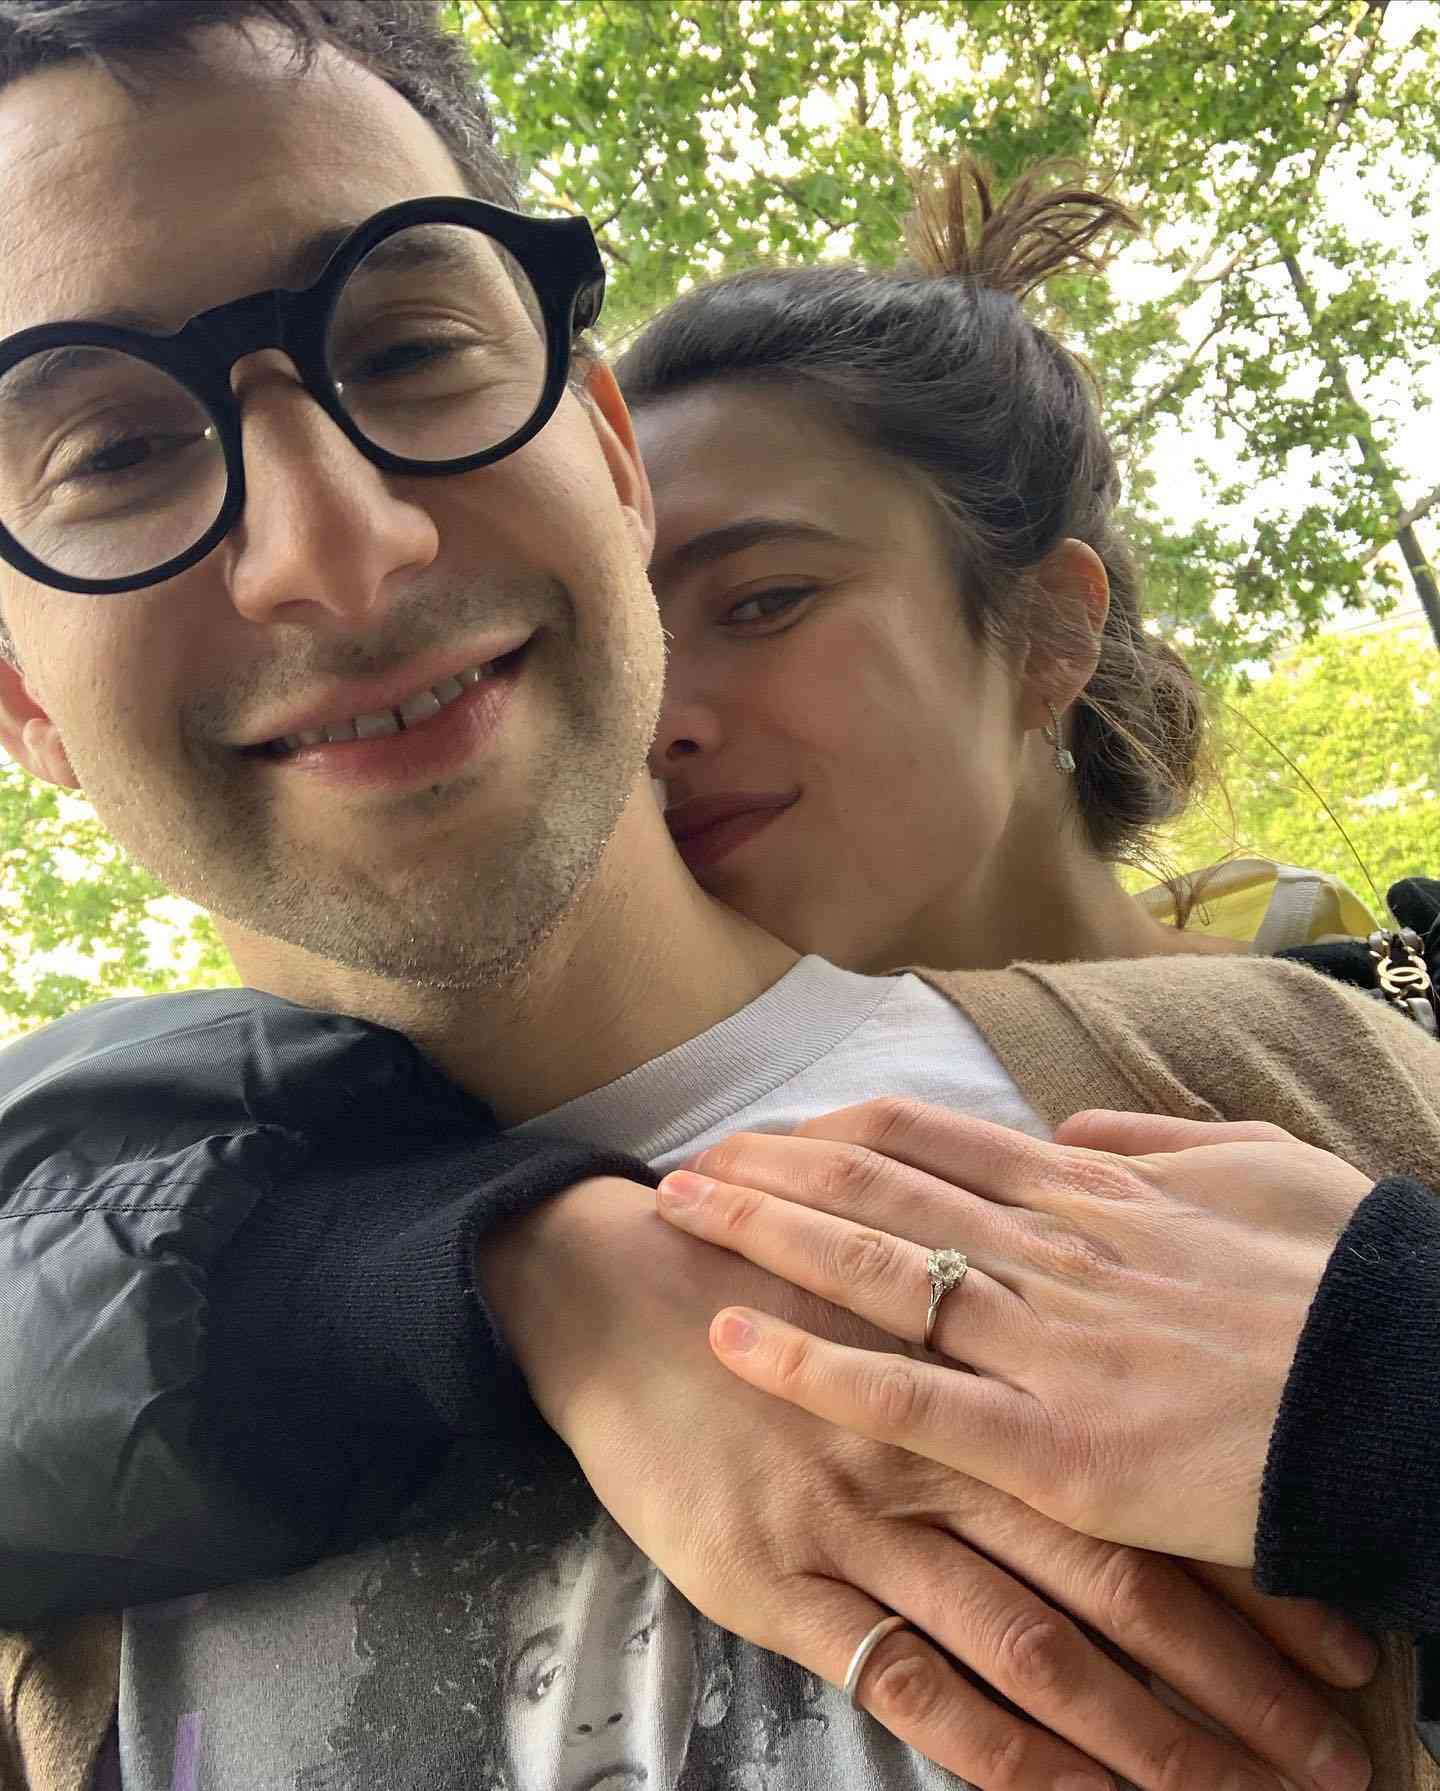 Margaret Qualley Gives a Closer Look at Her Engagement Ring from Jack Antonoff: ‘Oh I Love Him’